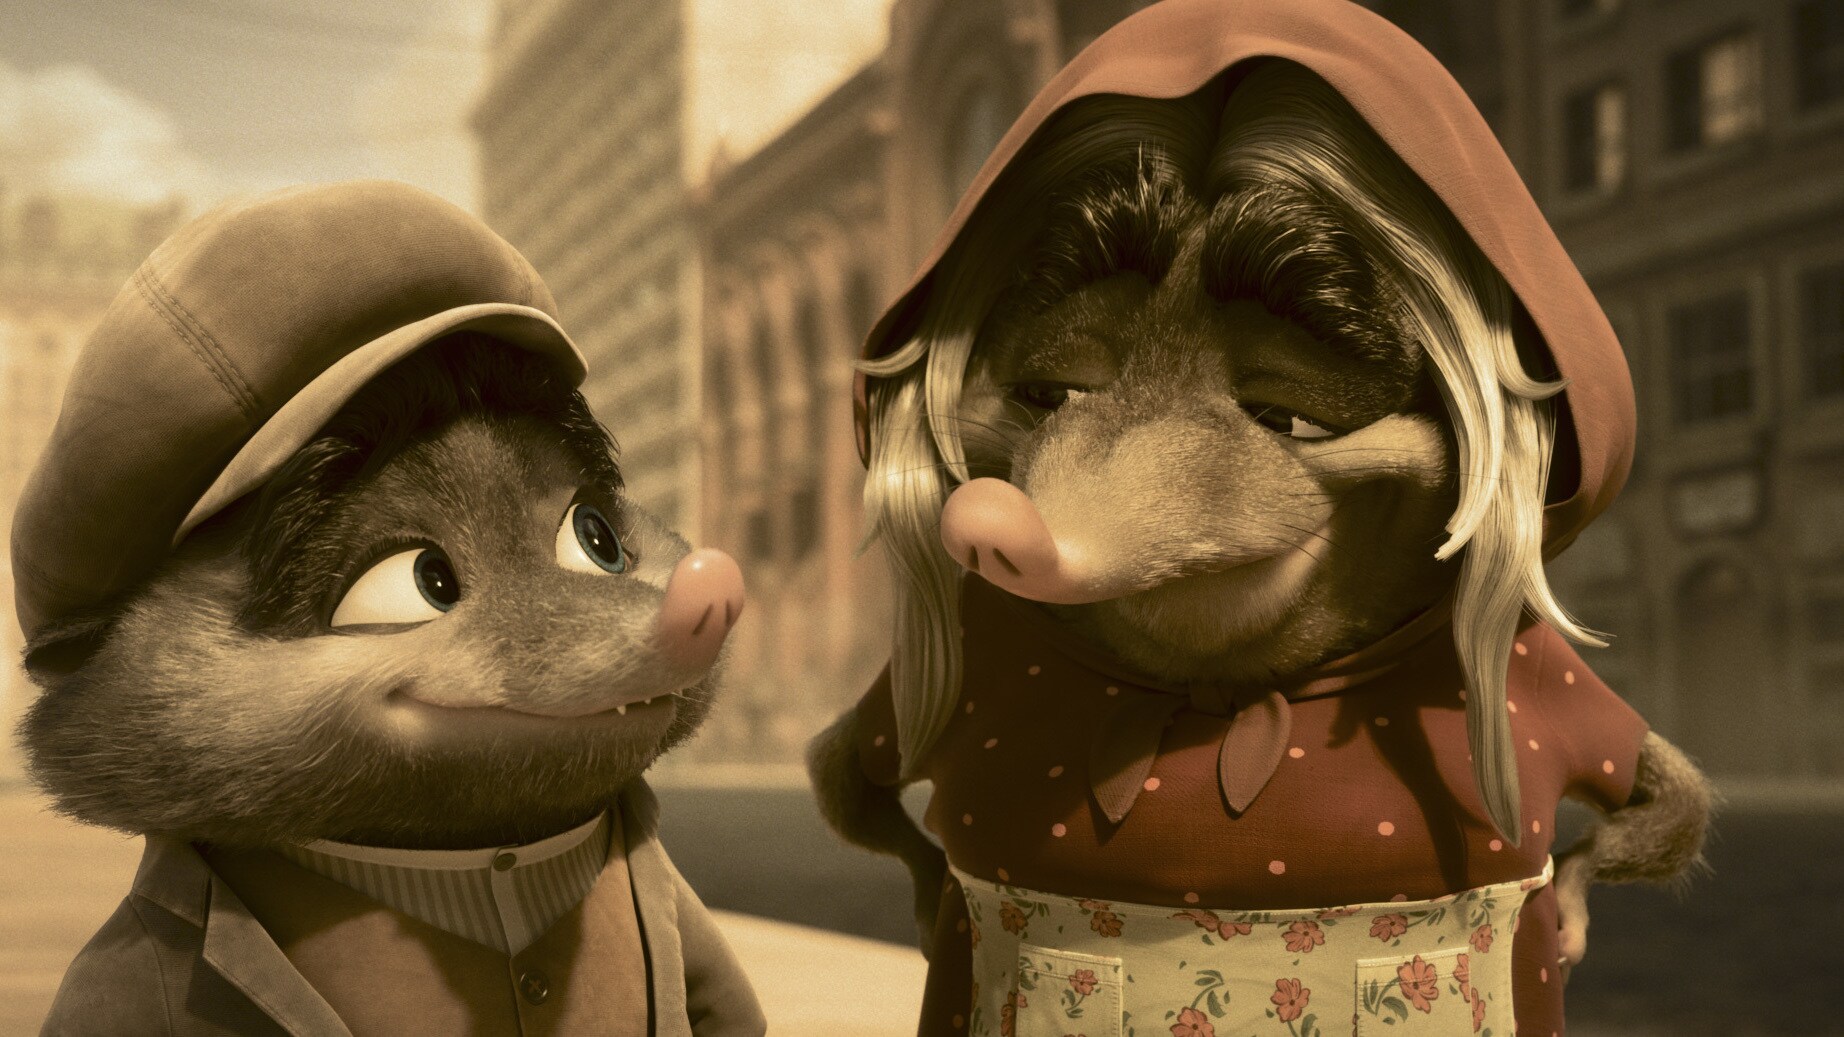 The Godfather of the Bride – "Zootopia+" heads back to the fast-paced mammal metropolis of Zootopia in a short-form series that dives deeper into the lives of some of the Oscar®-winning feature film's most intriguing characters, including a tale about a powerful arctic shrew known as Mr. Big. The episode "The Godfather of the Bride," goes back in time to his days as Mr. Small, who discovers the important of friends, family and community after immigrating to Zootopia alongside his beloved mother. Directed by Josie Trinidad and Trent Correy, and produced by Nathan Curtis, "Zootopia+" streams on Disney+ beginning Nov. 9, 2022. © 2022 Disney. All Rights Reserved.